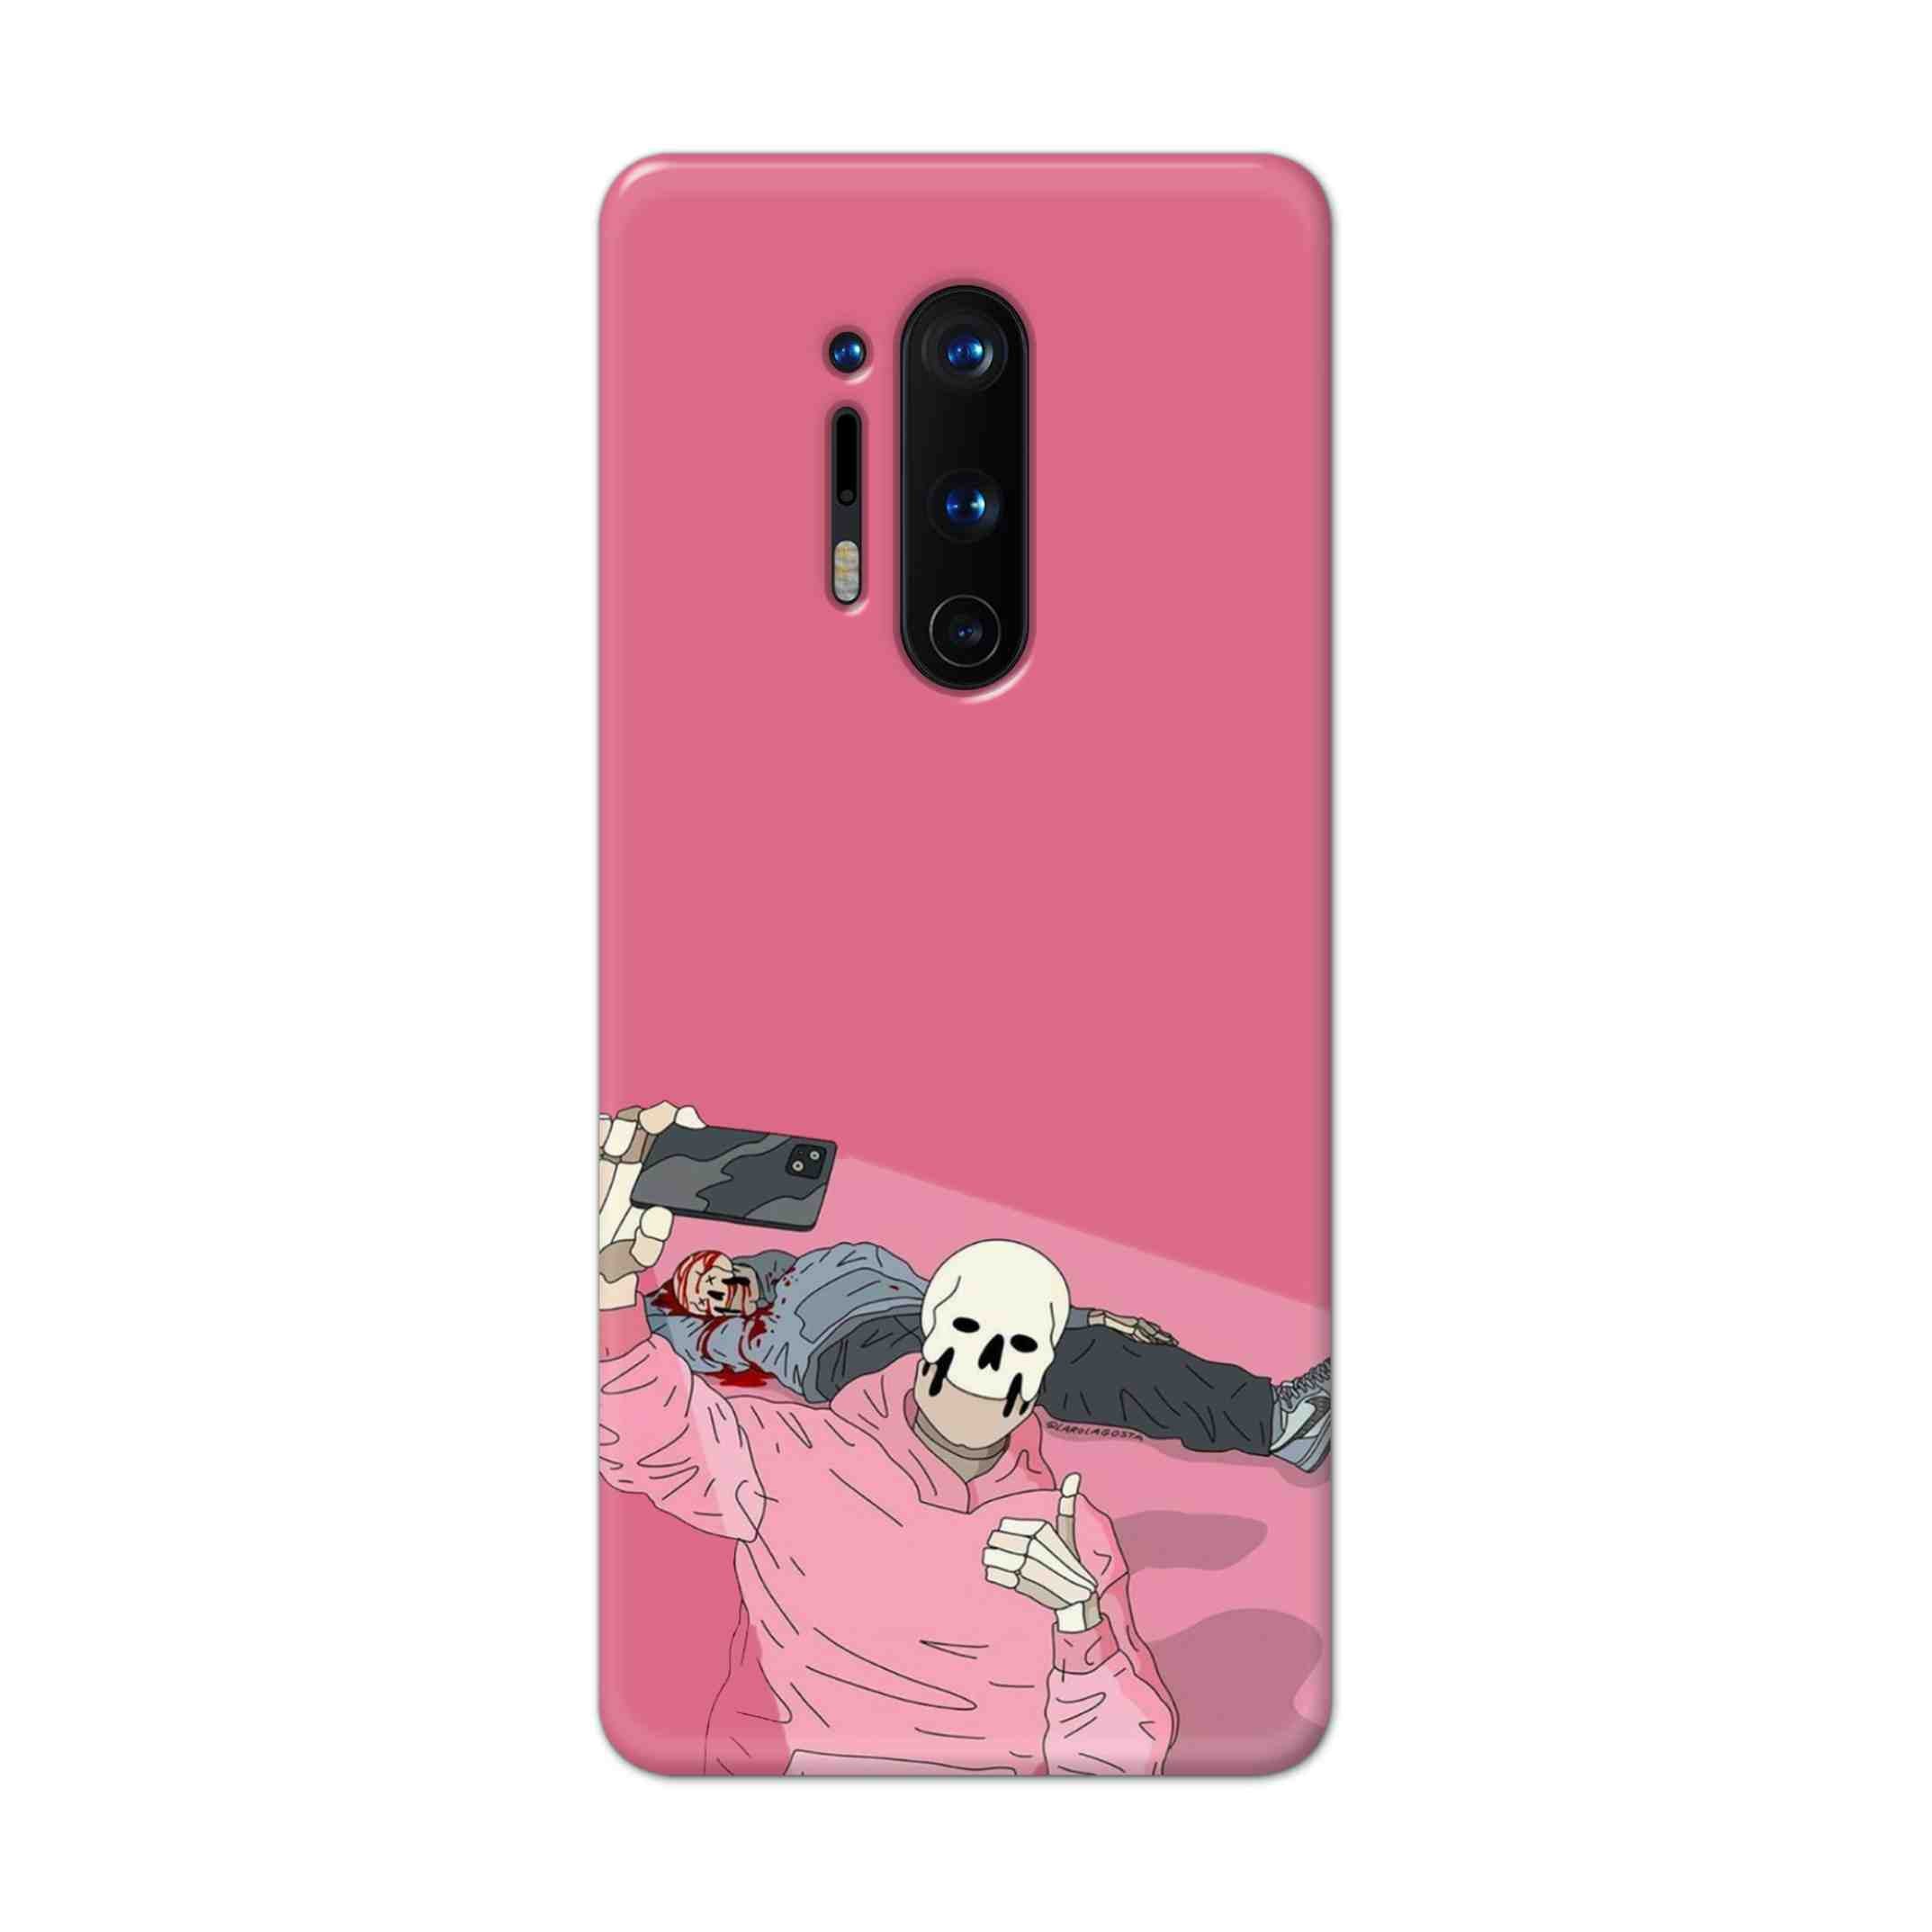 Buy Selfie Hard Back Mobile Phone Case Cover For OnePlus 8 Pro Online